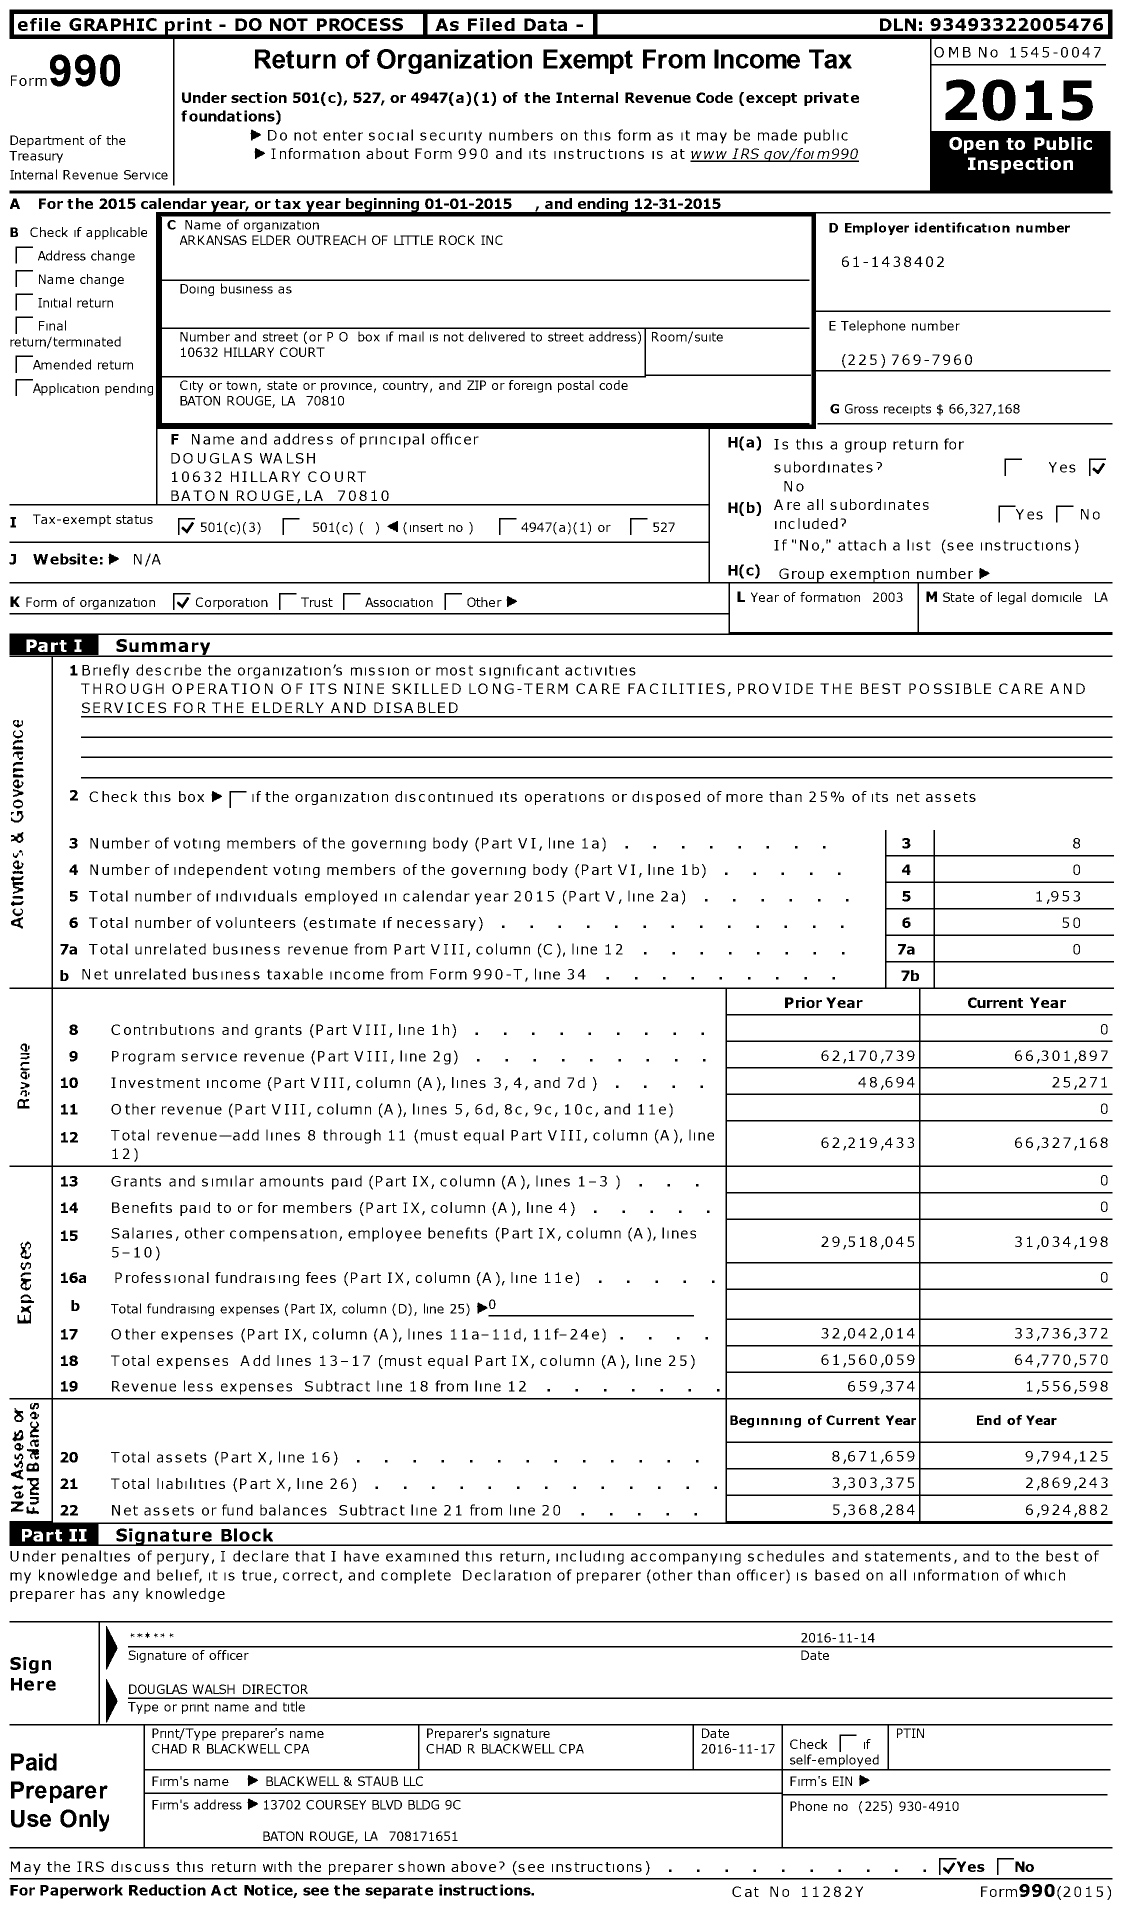 Image of first page of 2015 Form 990 for Arkansas Elder Outreach of Little Rock